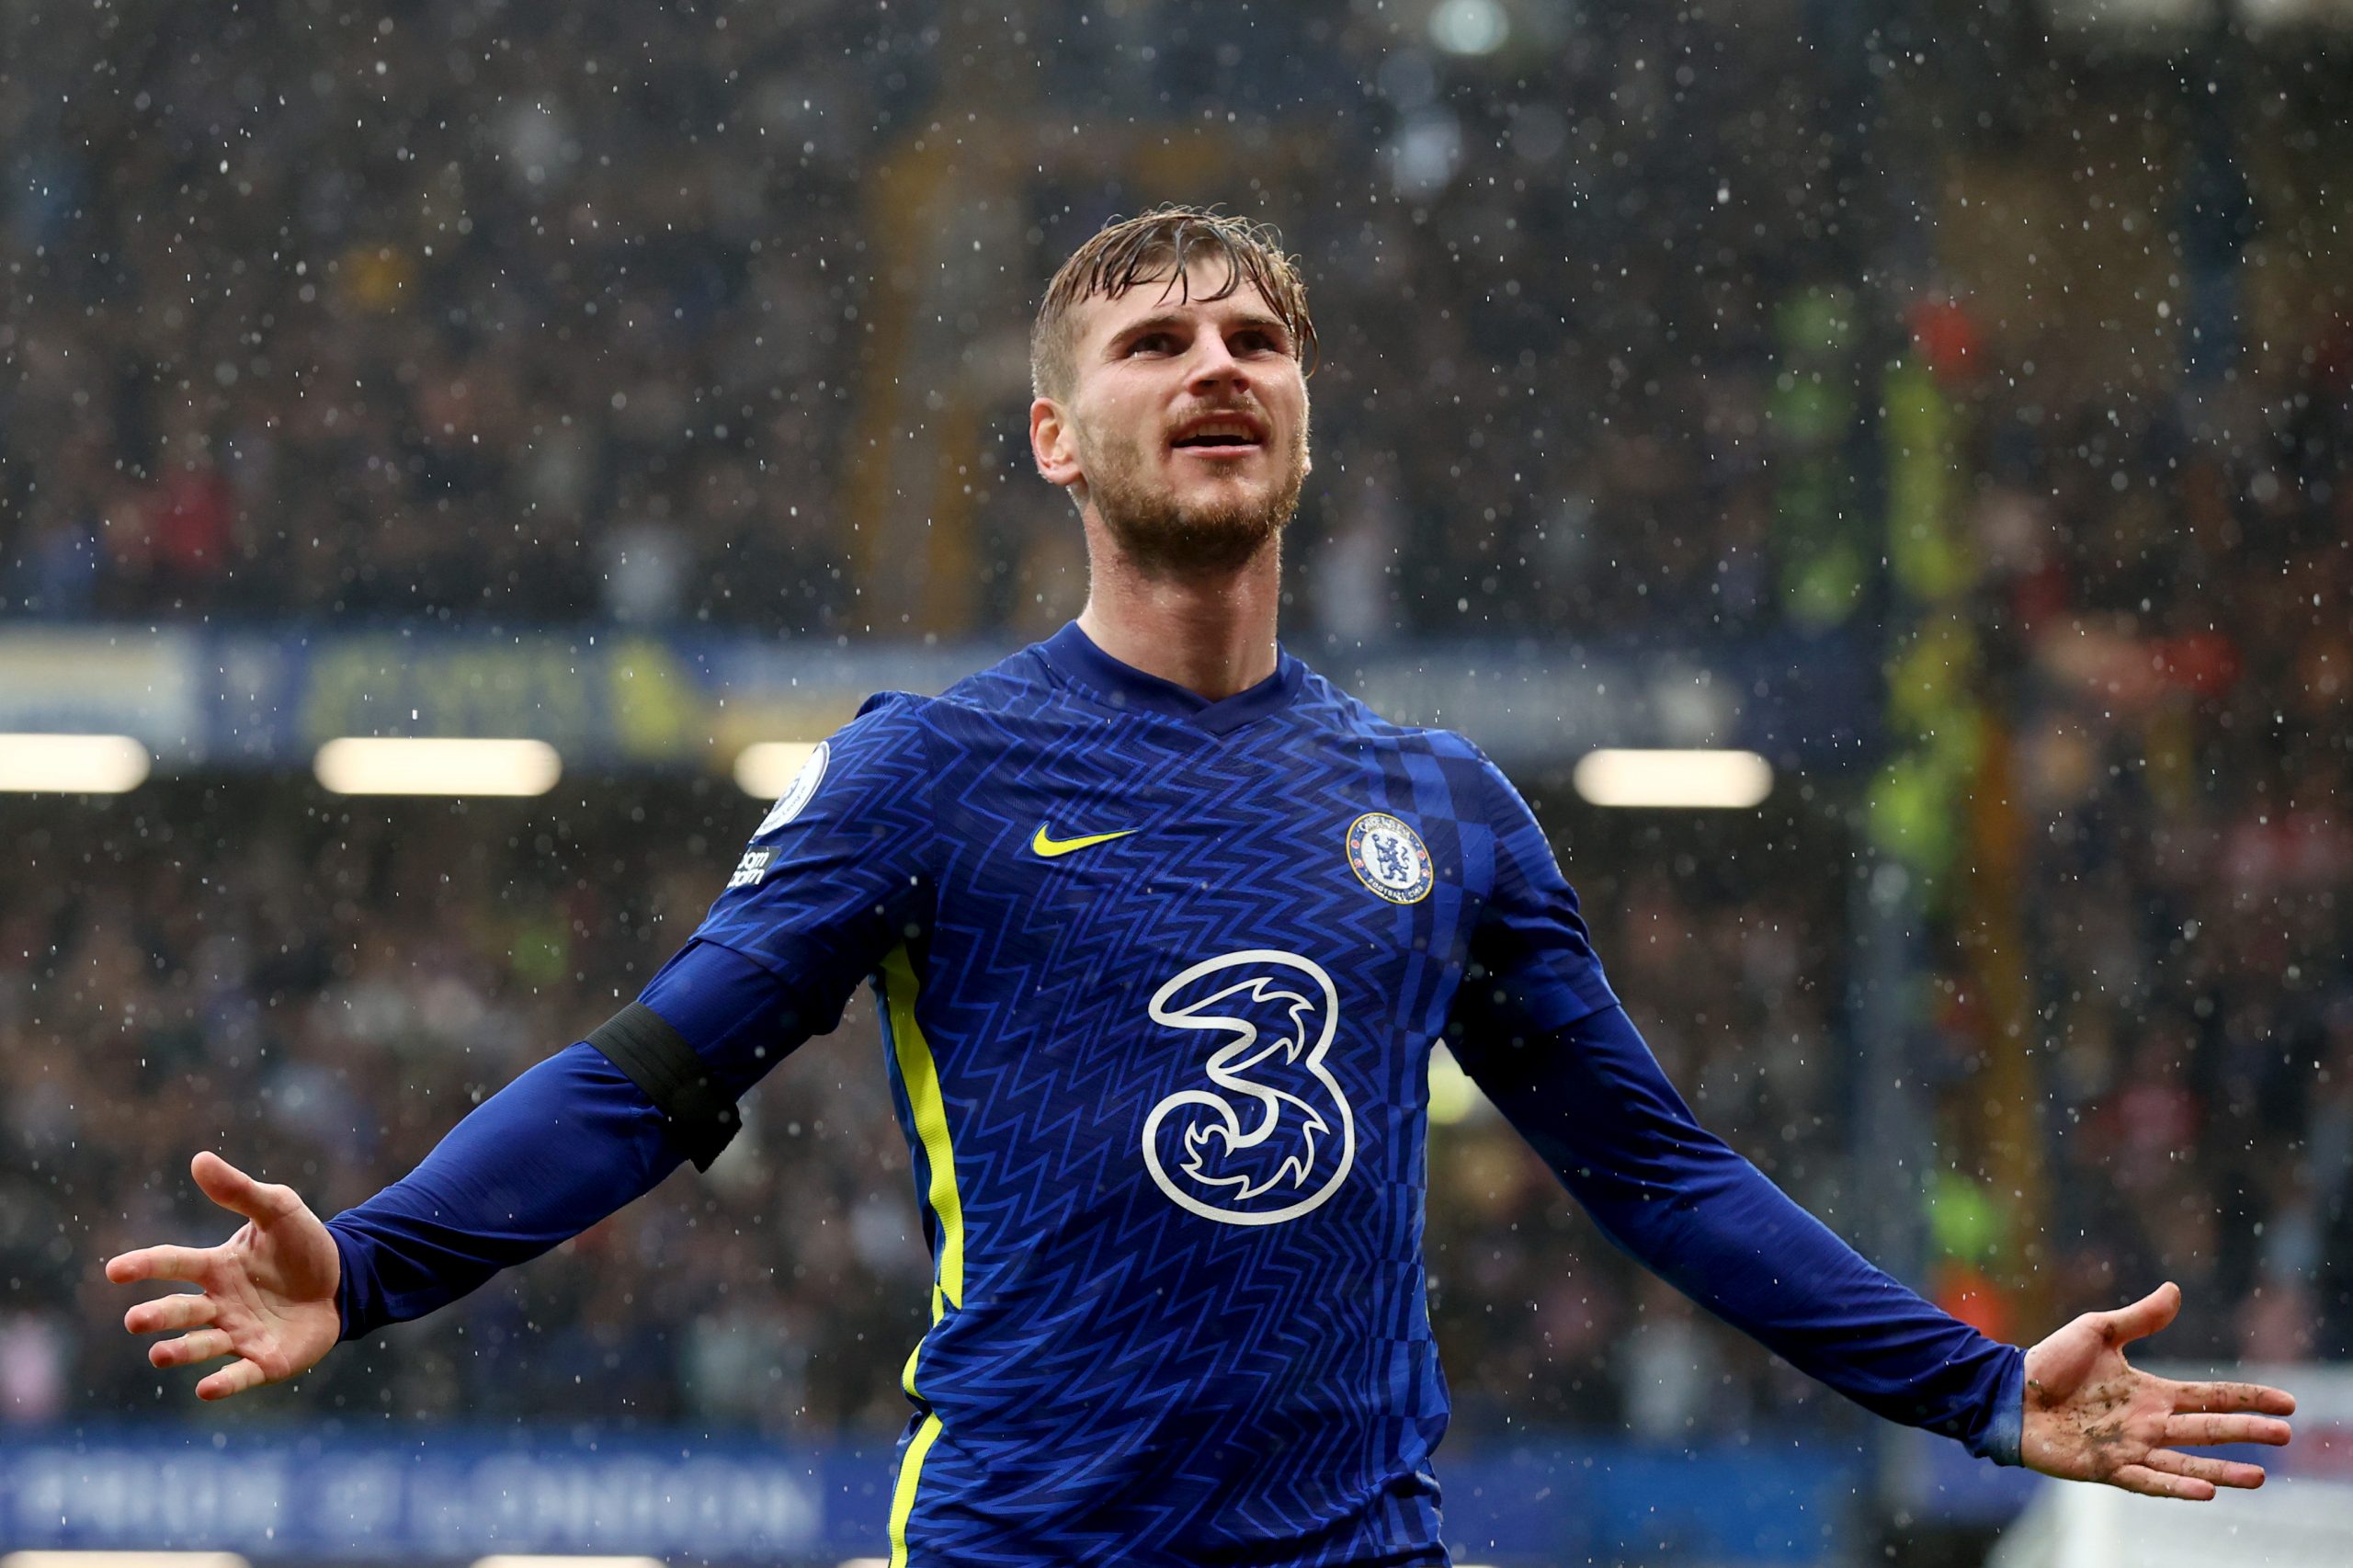 Timo Werner on leaving Chelsea